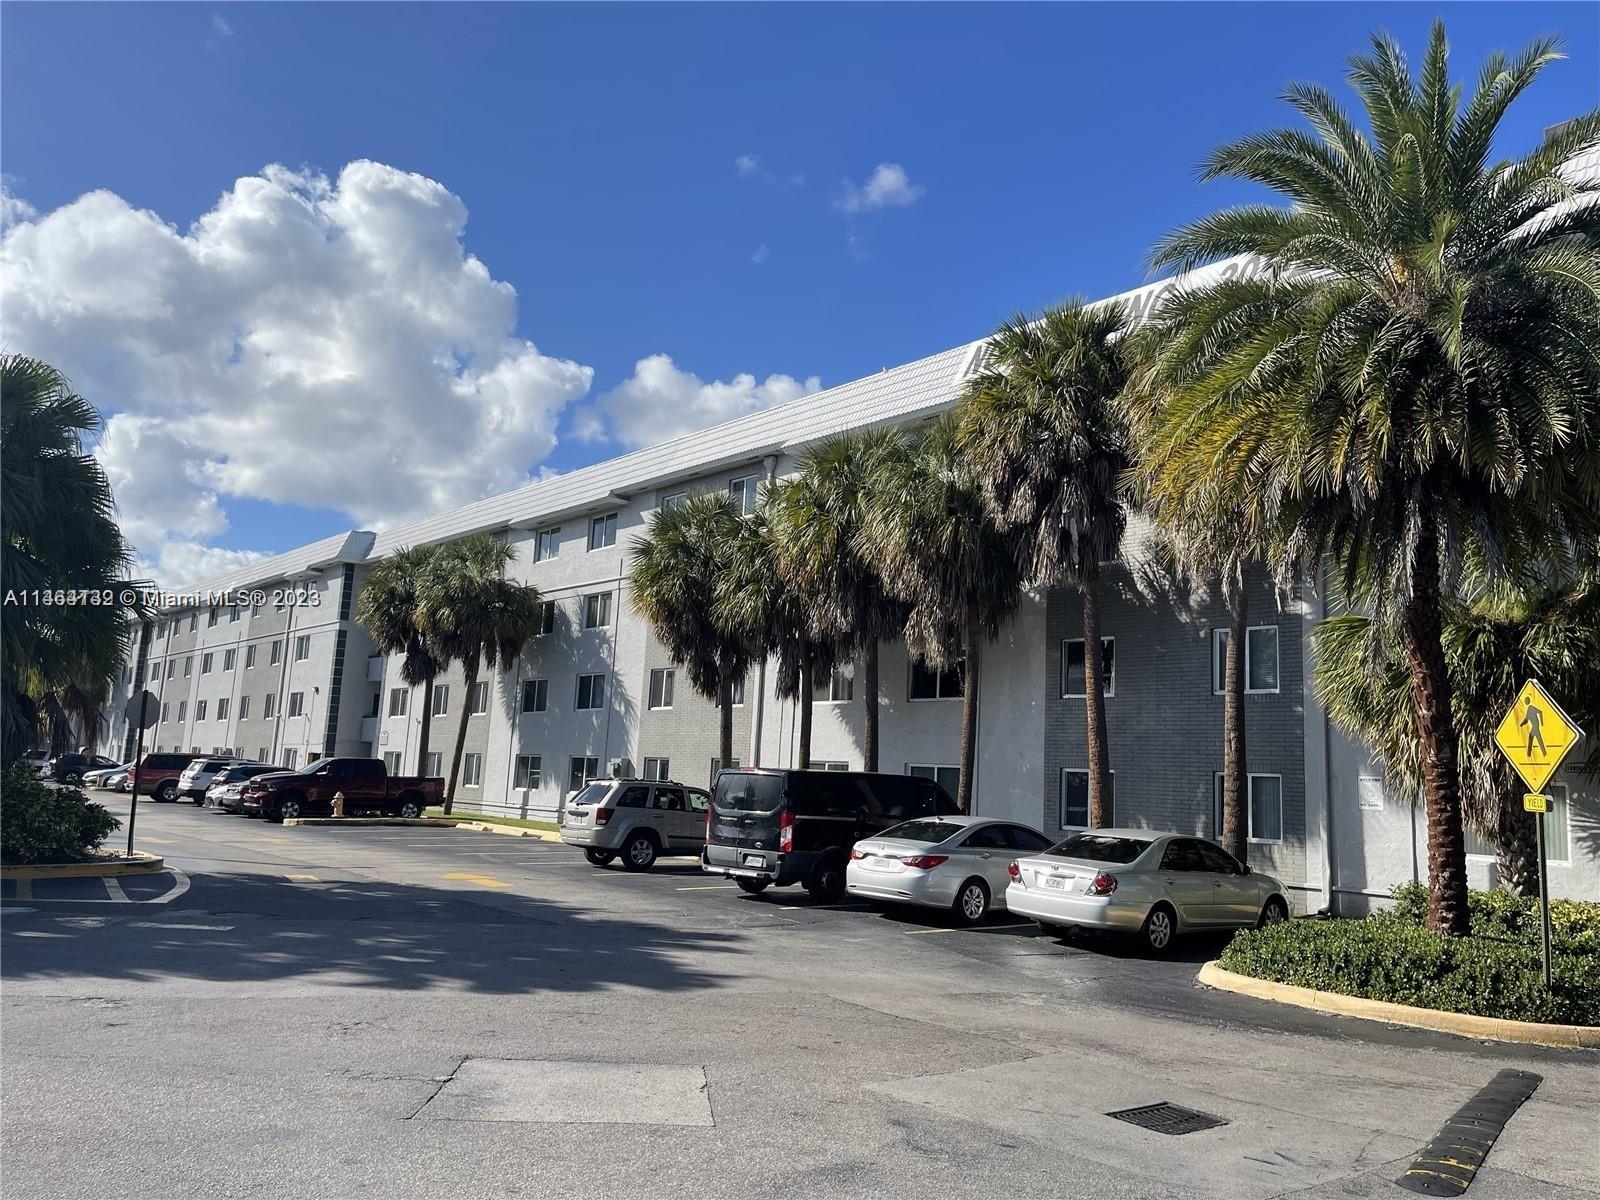 10900 SW 196th St 347, Cutler Bay, Florida 33157, 1 Bedroom Bedrooms, ,1 BathroomBathrooms,Residentiallease,For Rent,10900 SW 196th St 347,A11464132